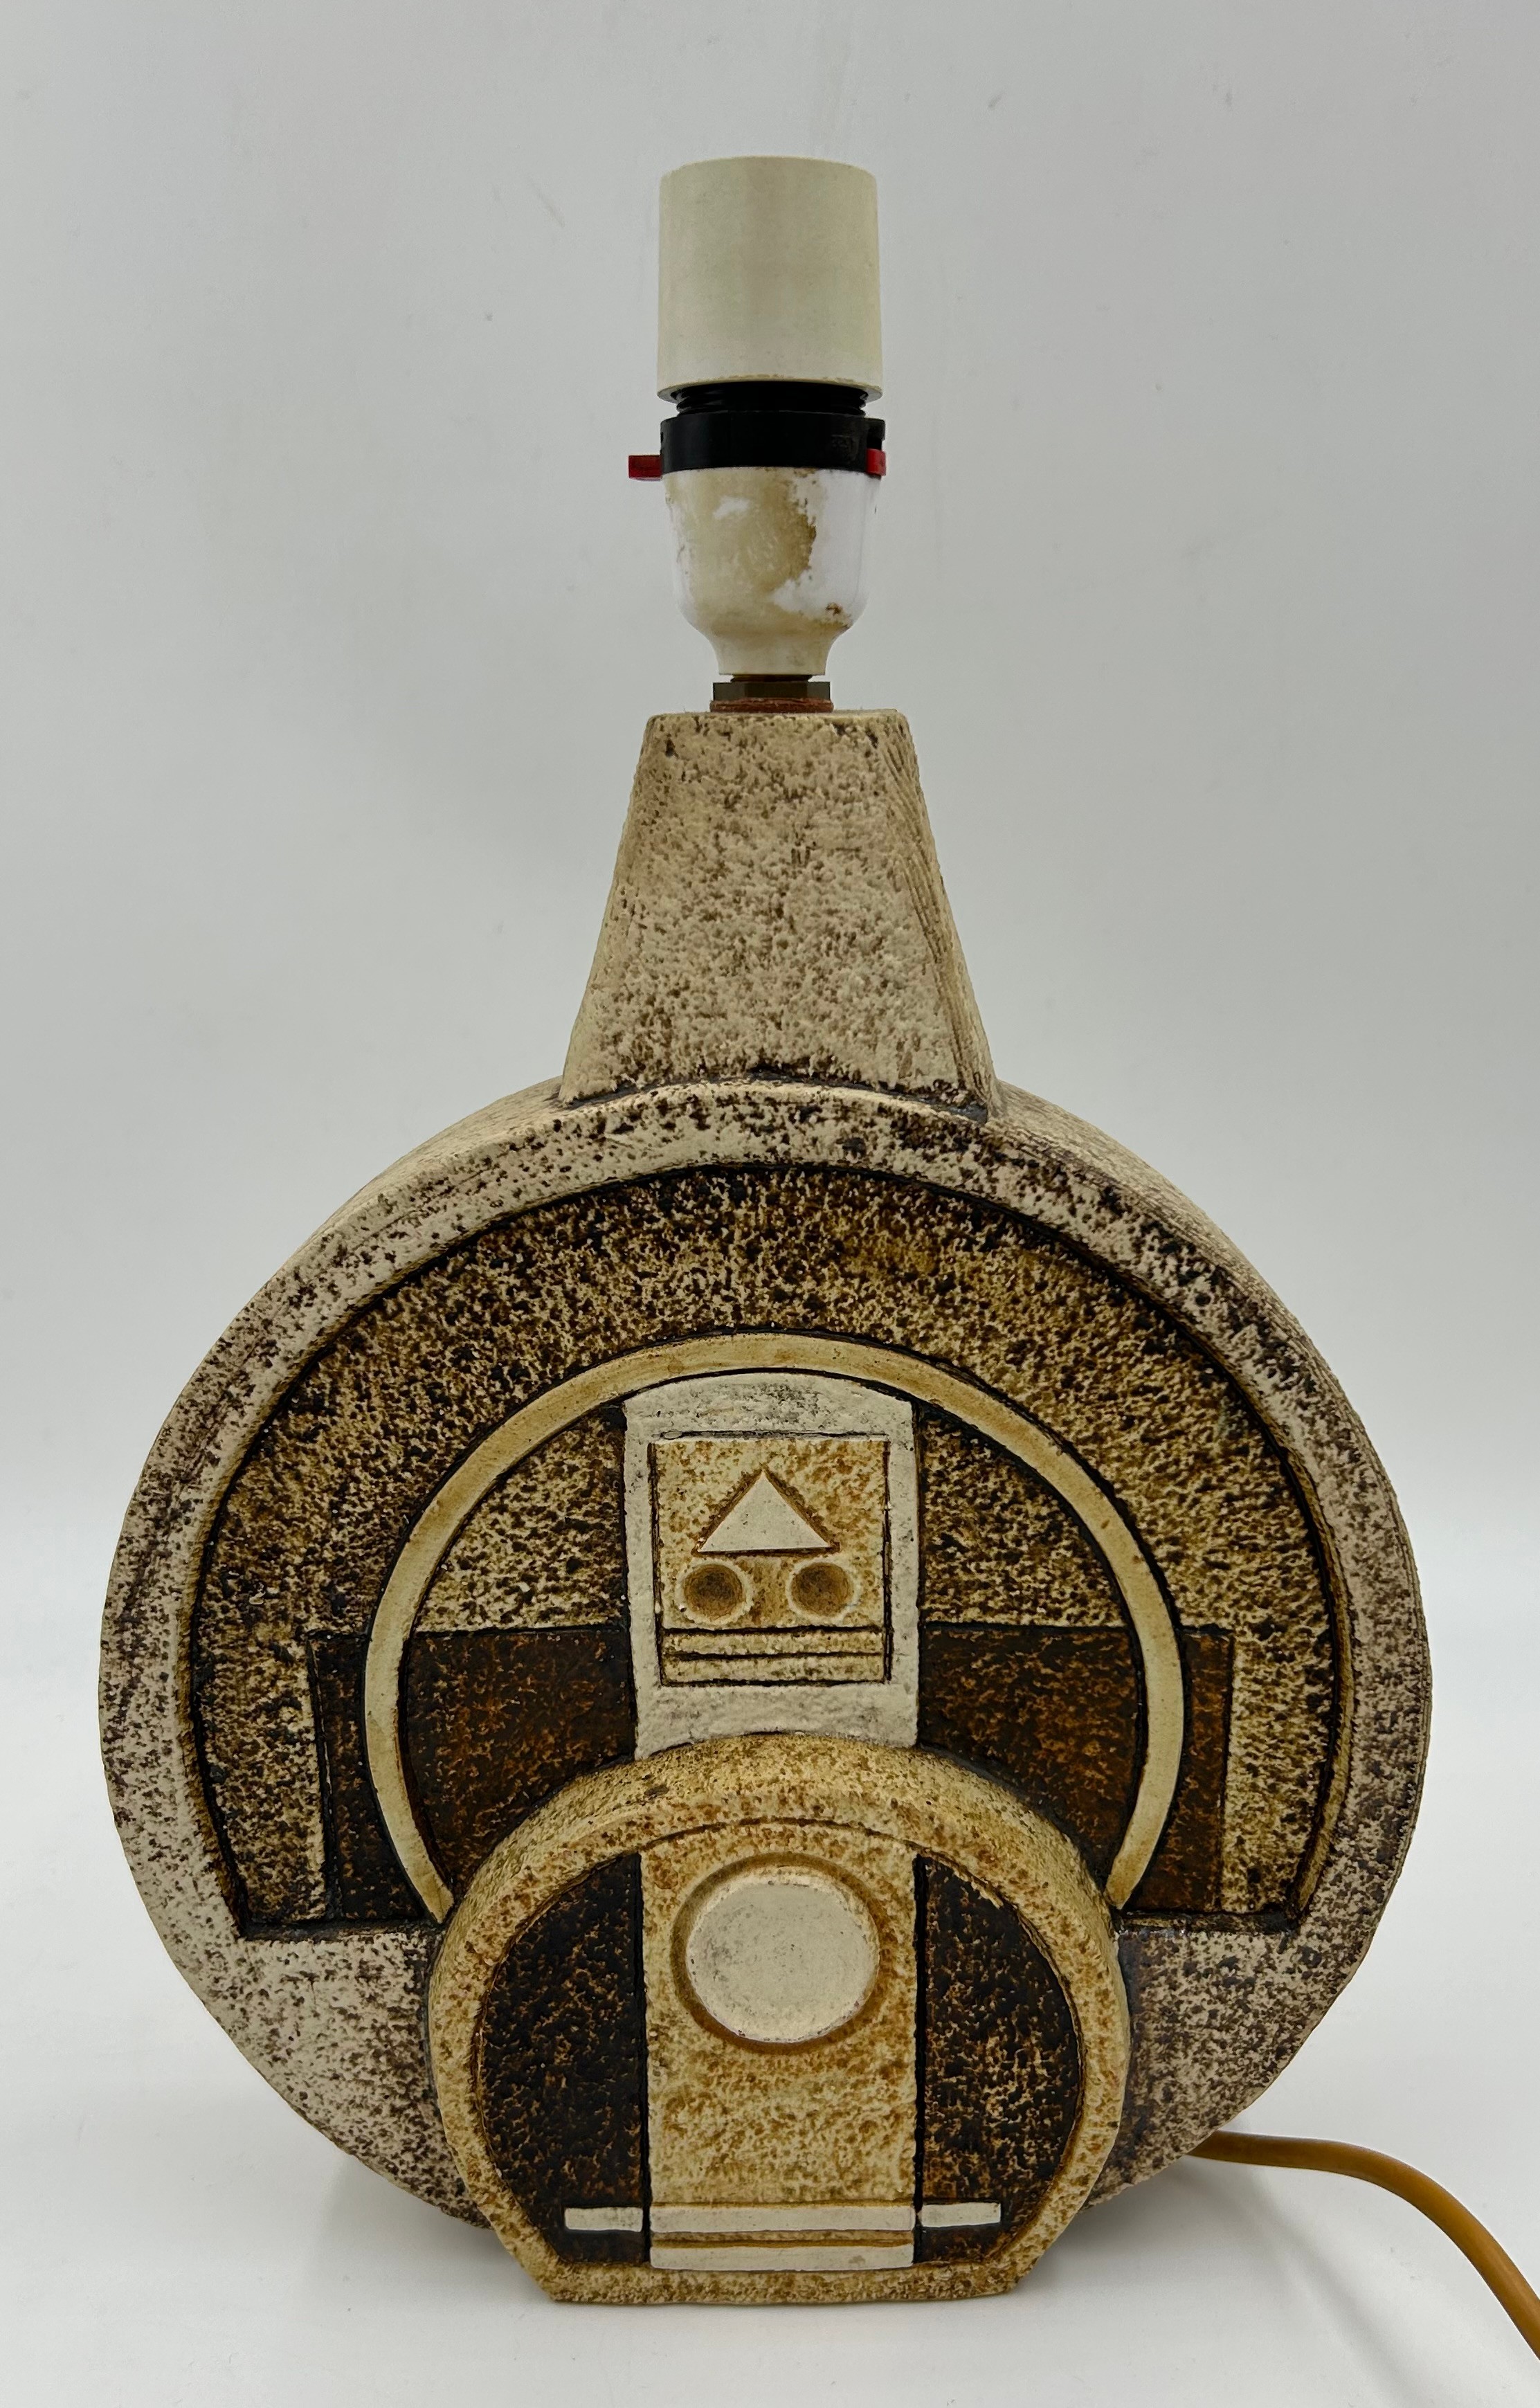 Troika Pottery Wheel Lamp with geometric relief motifs. Signed to base Troika Cornwall. Ht to top of